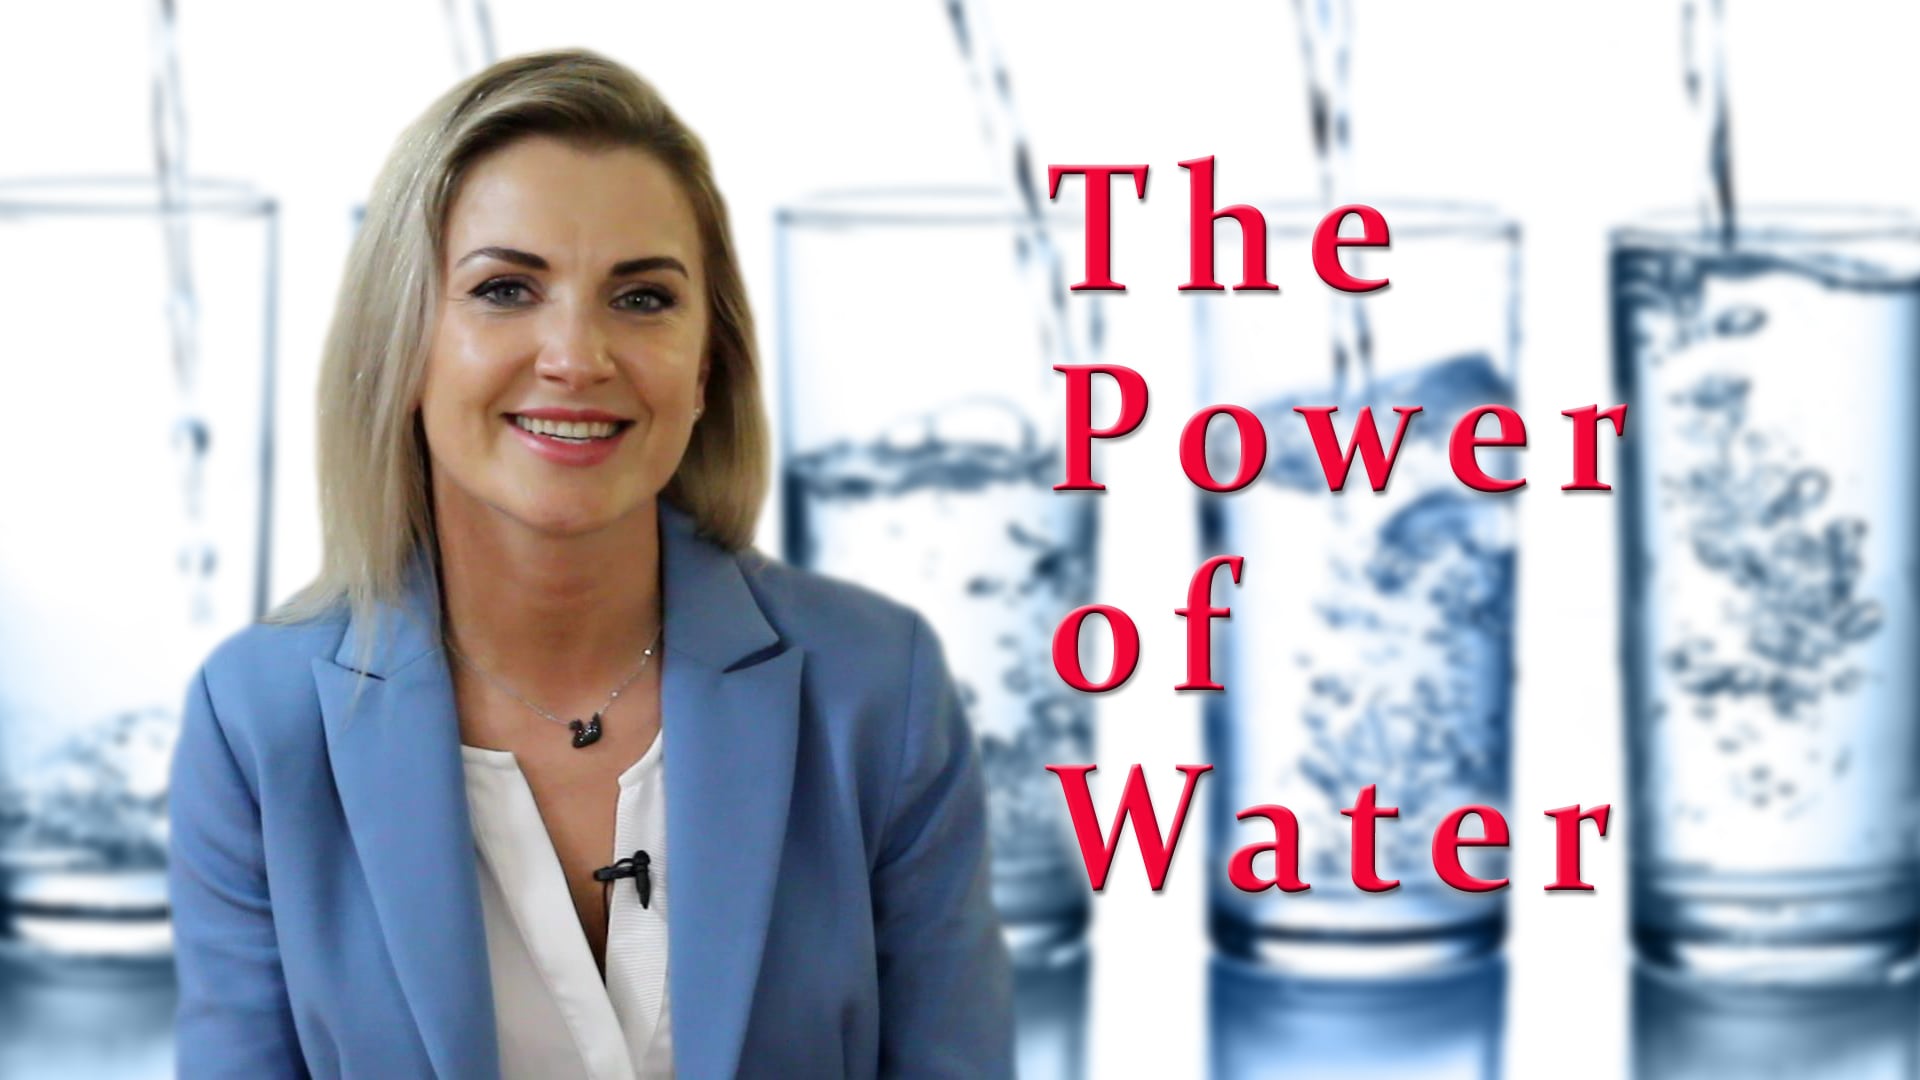 Eye On Life: The Power of Water